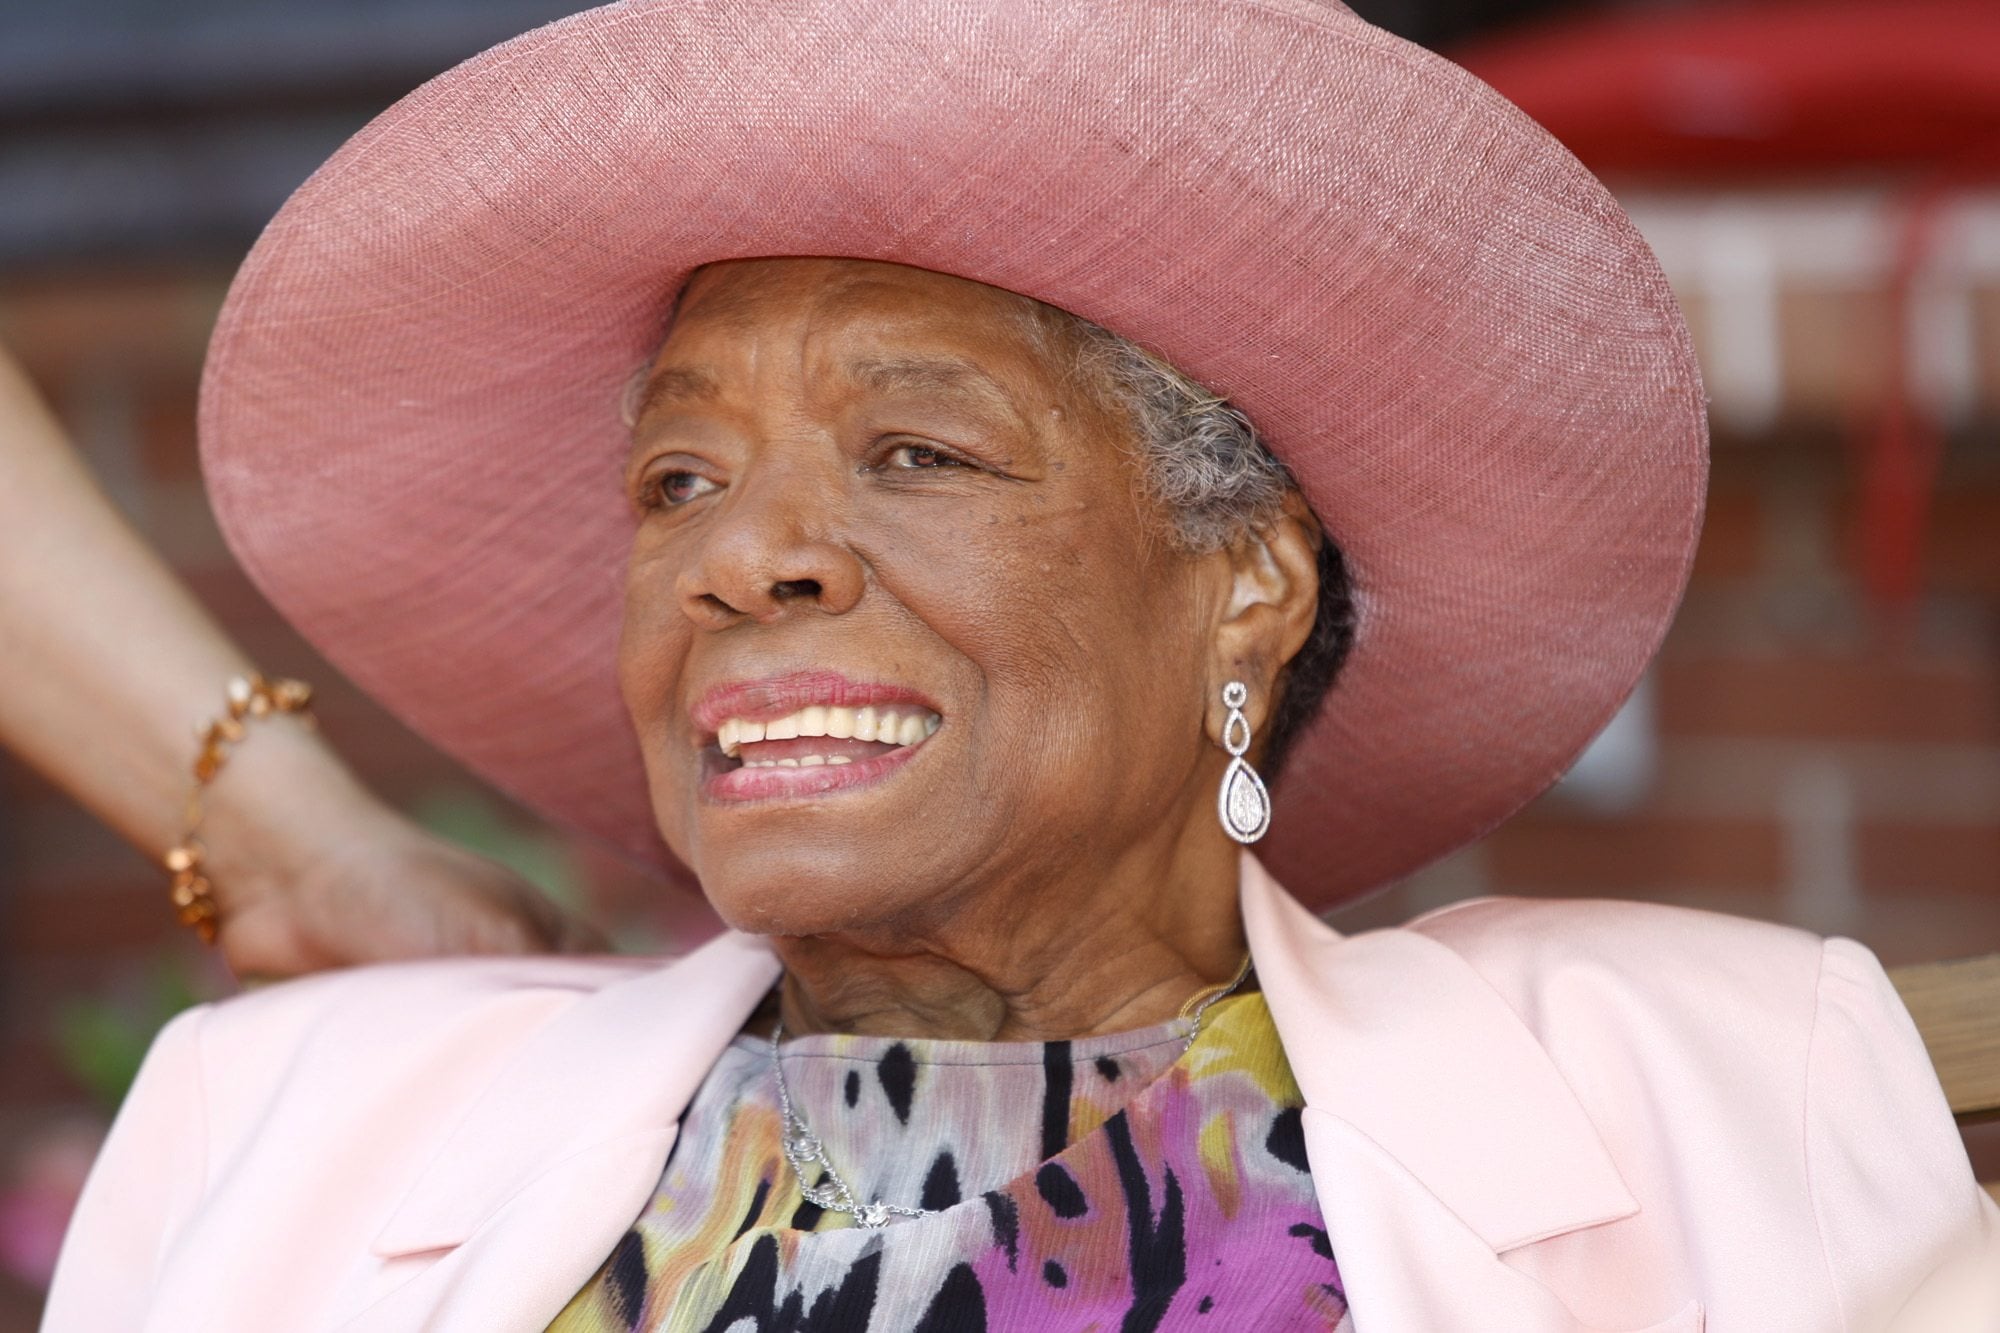 Poet and author Maya Angelou died in 2014.